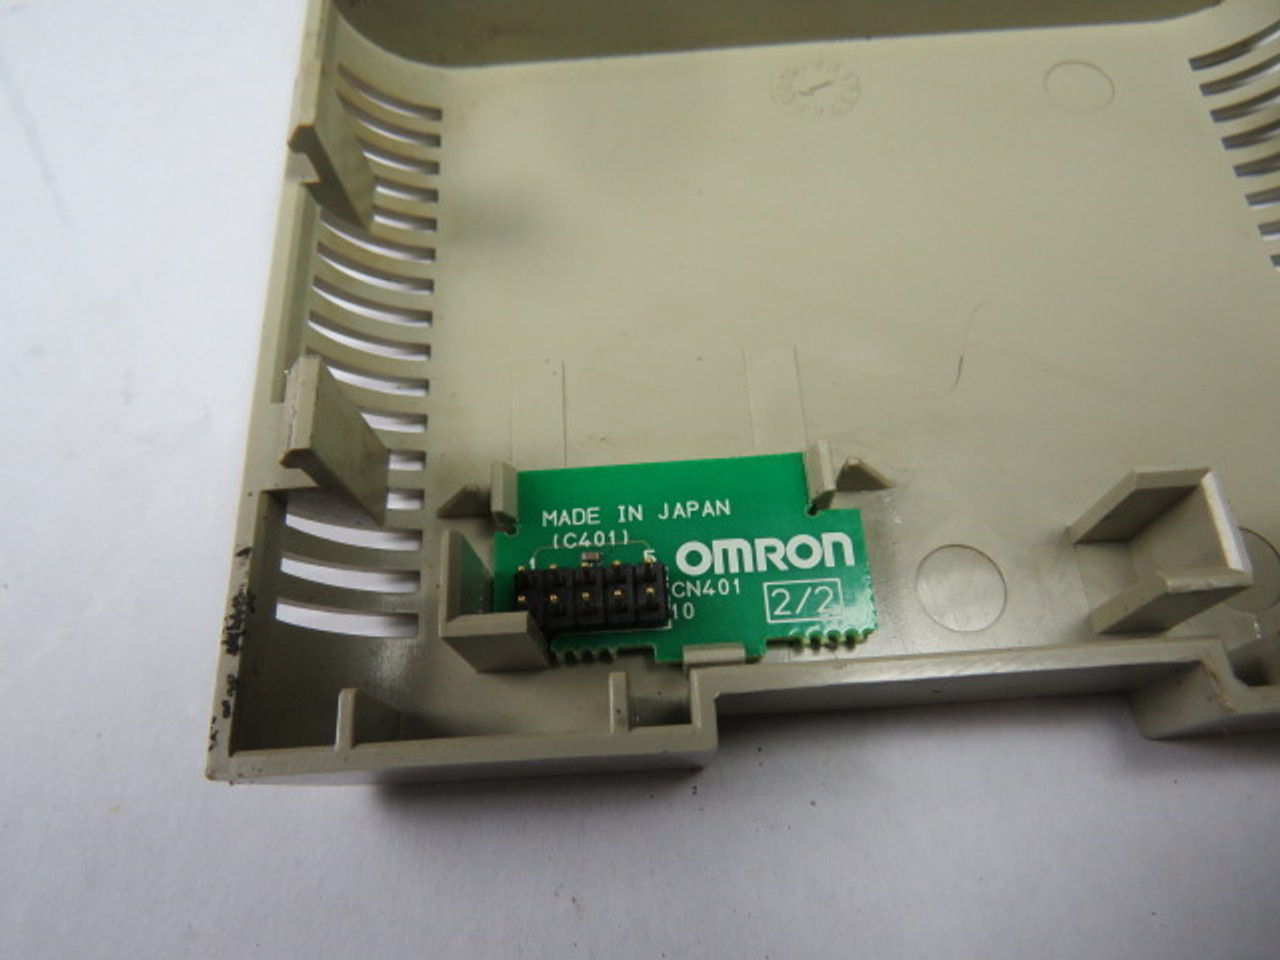 Omron CN401 Power Supply End Plate USED